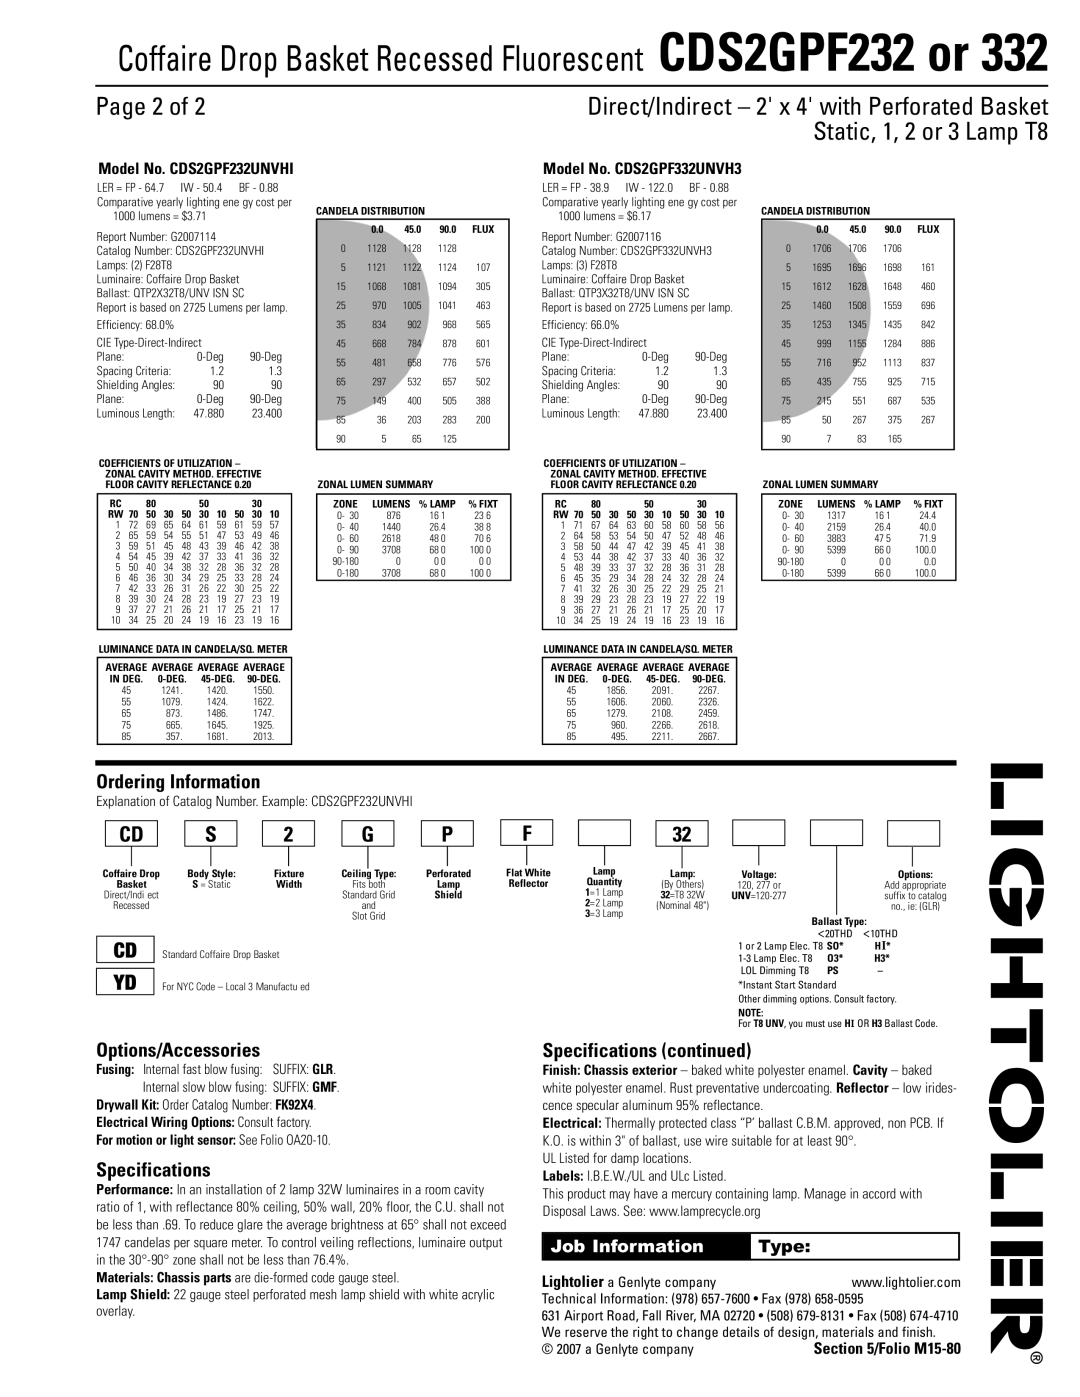 Lightolier CDS2GPF232 or 332 Page 2 of, Ordering Information, Options/Accessories, Specifications, Job Information, Type 